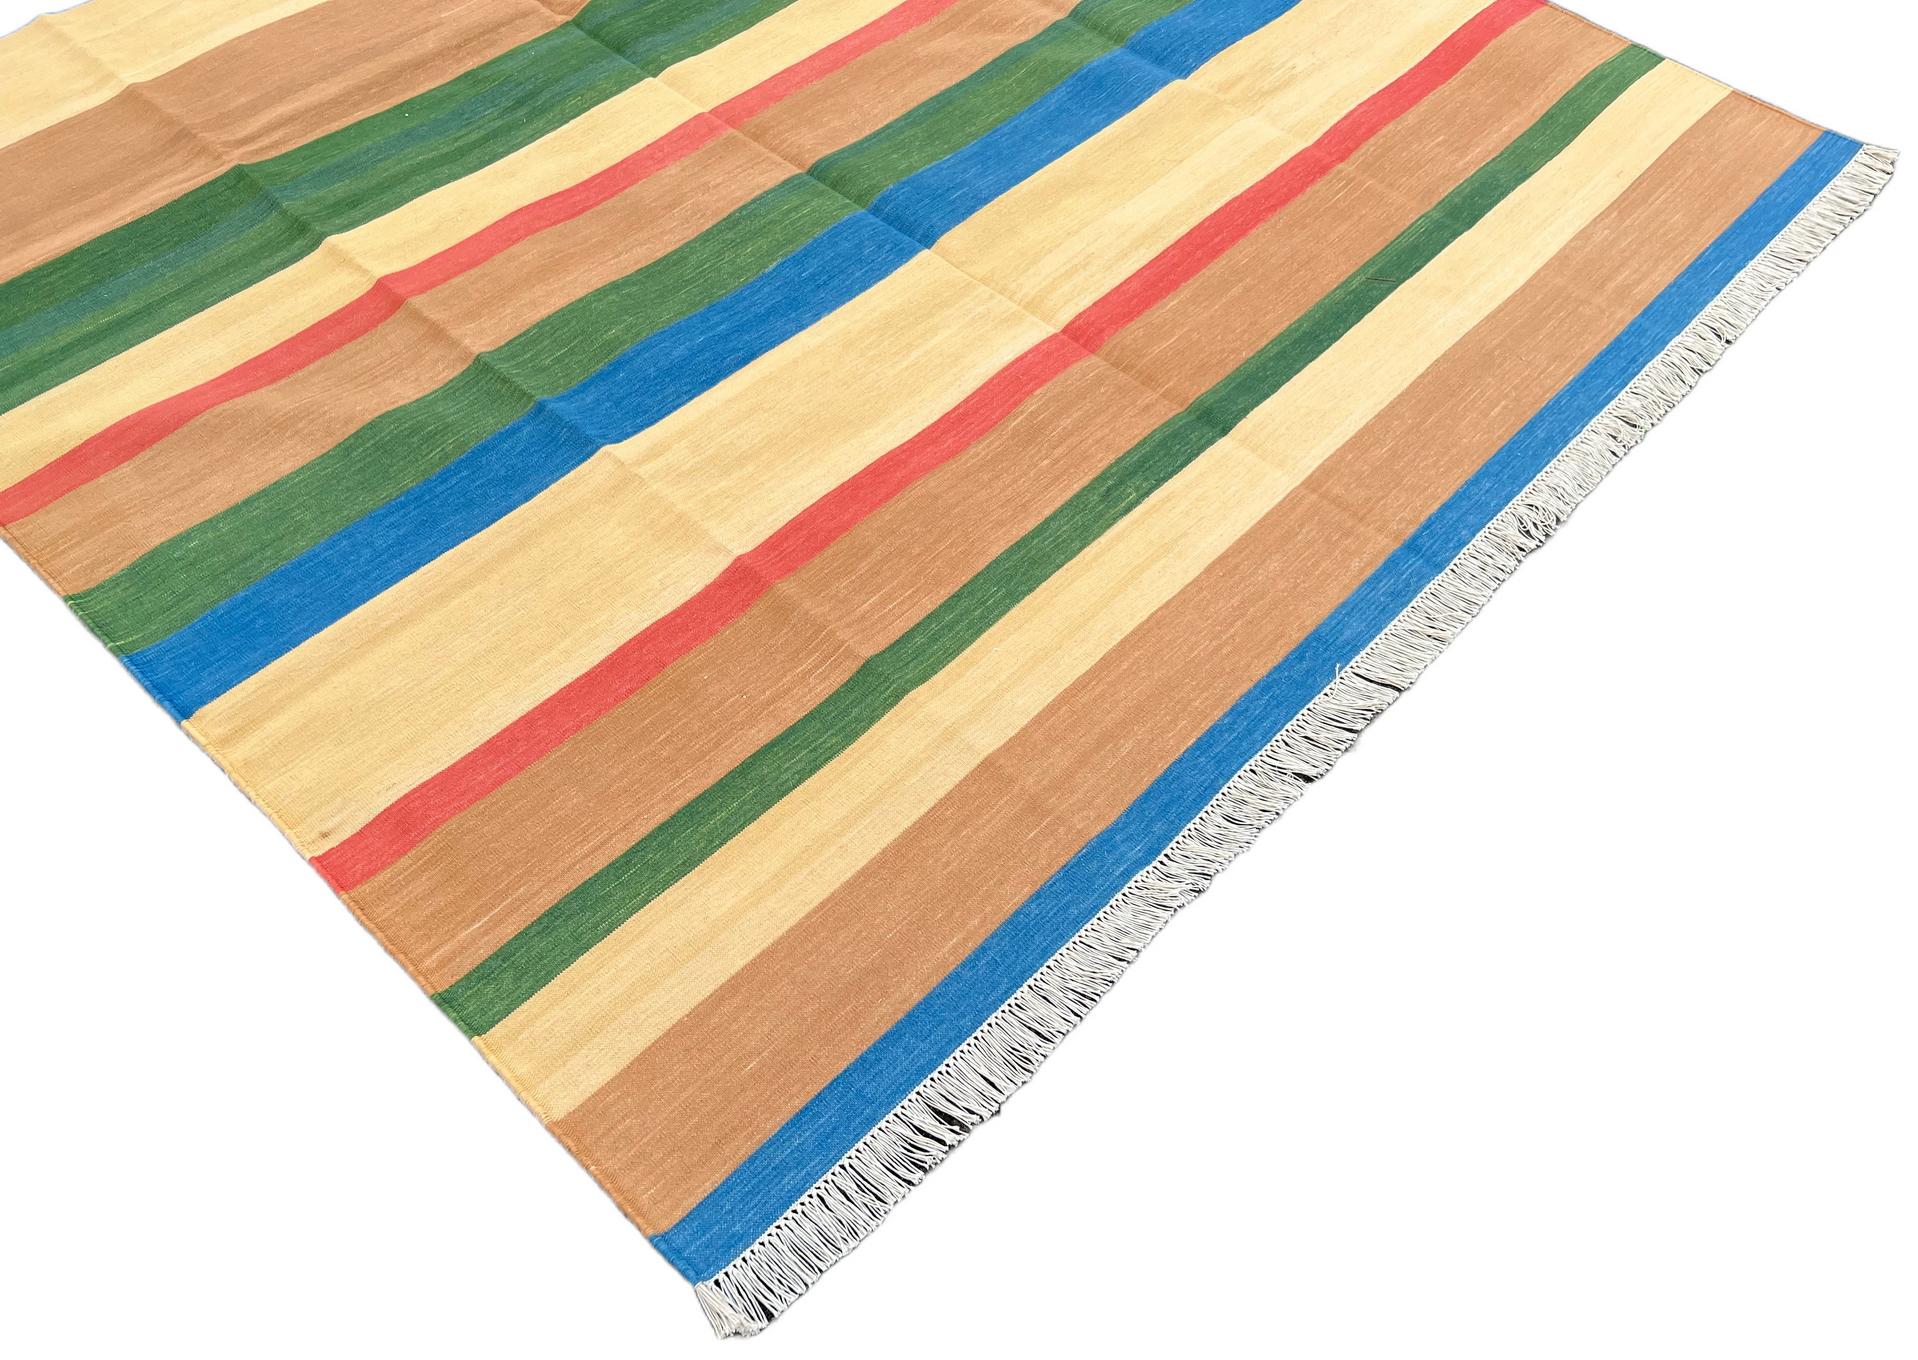 Mid-Century Modern Handmade Cotton Area Flat Weave Rug, 6x9 Tan, Blue And Green Striped Dhurrie Rug For Sale